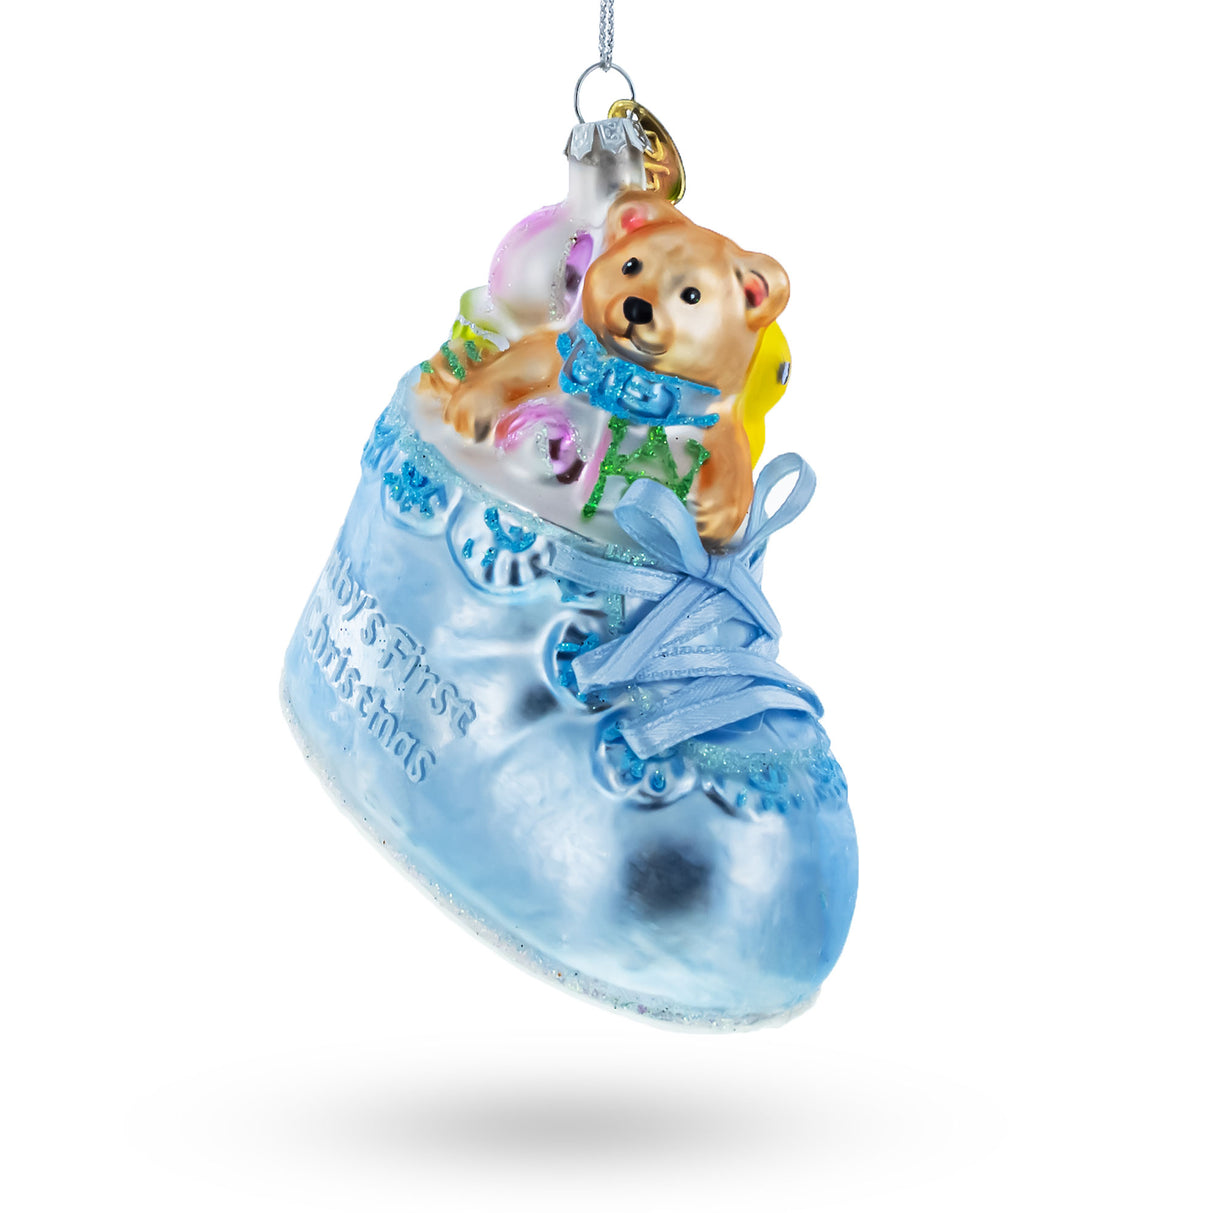 Teddy Bear Nestled in a Blue Shoe for Baby's First - Blown Glass Christmas Ornament in Blue color,  shape